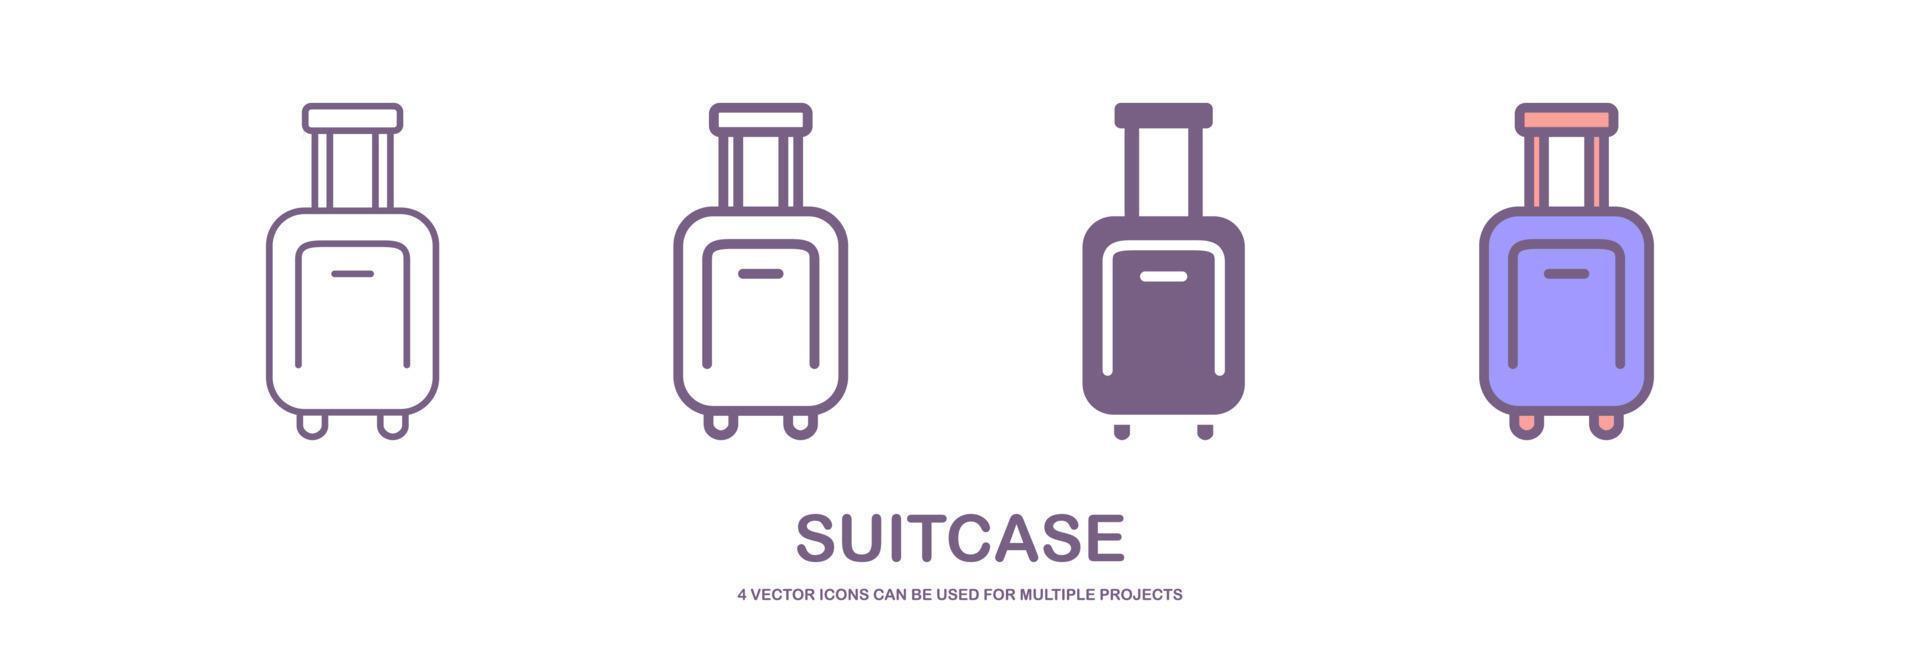 Set of suitcase icon illustration vector